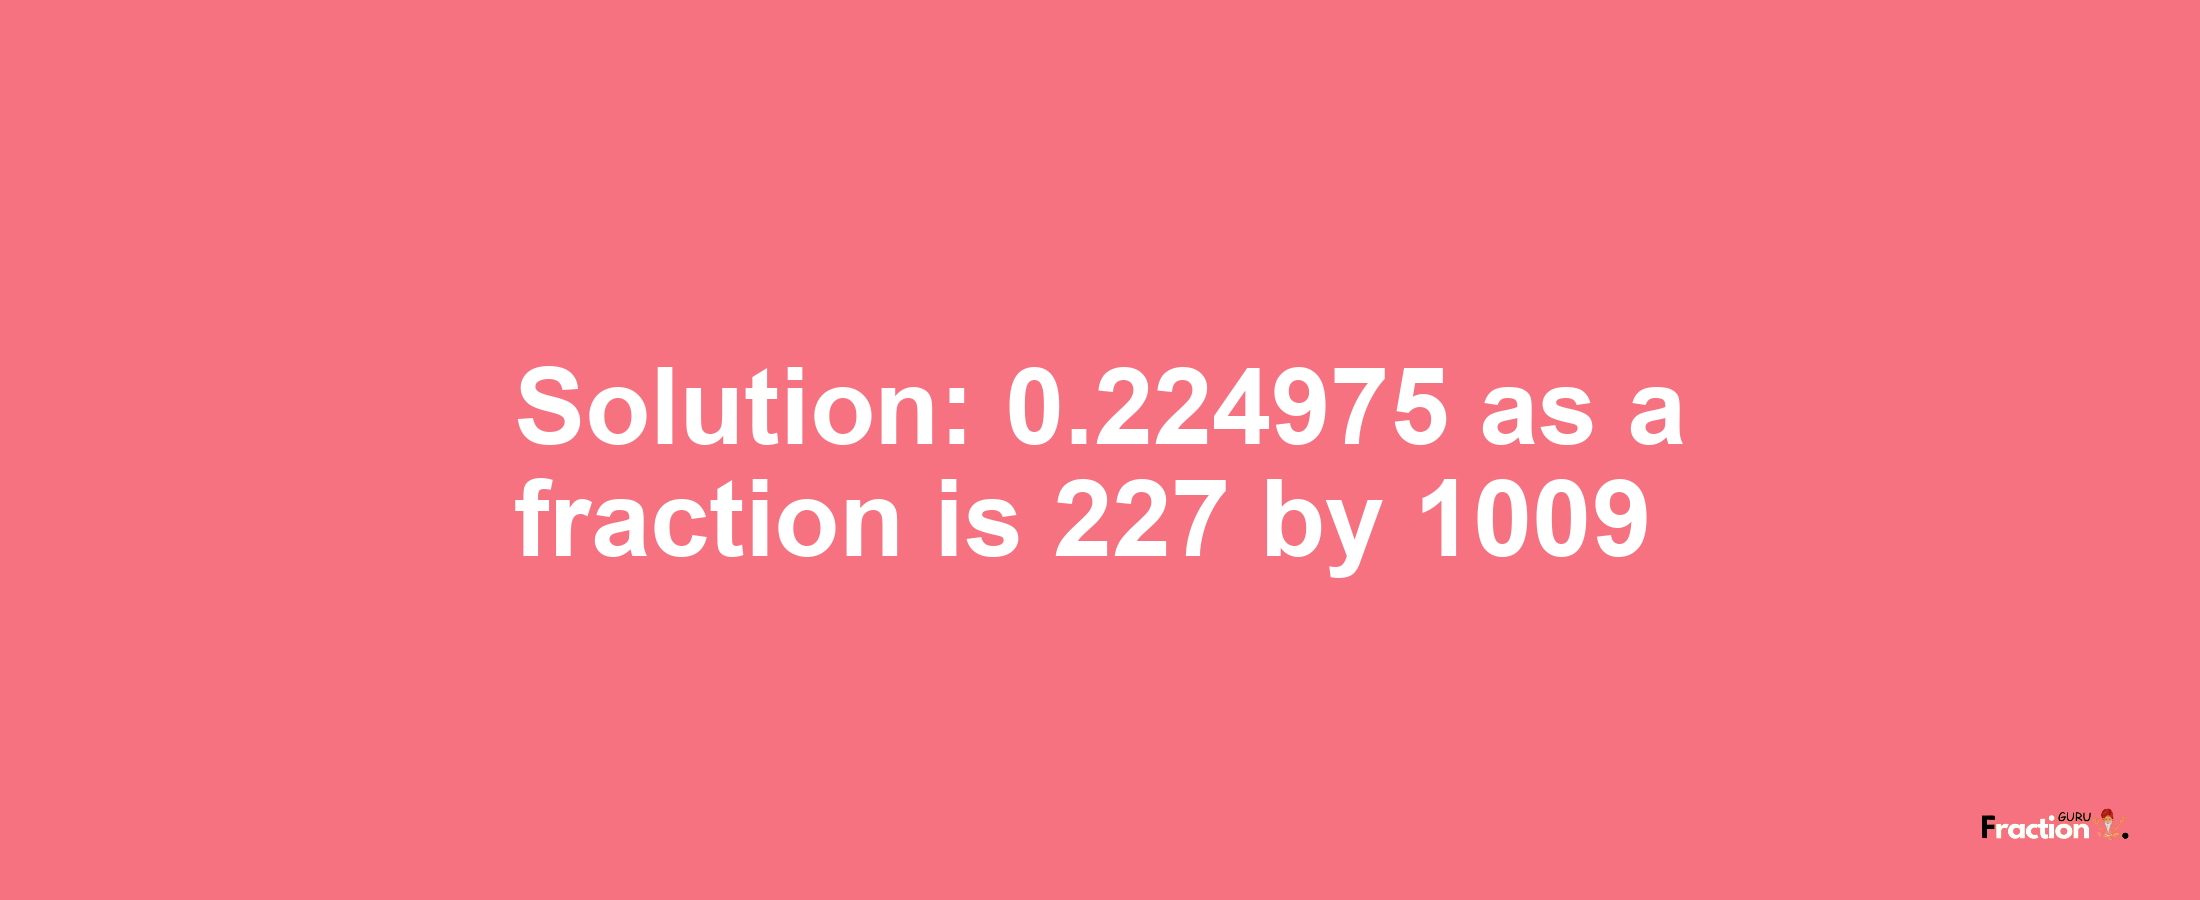 Solution:0.224975 as a fraction is 227/1009